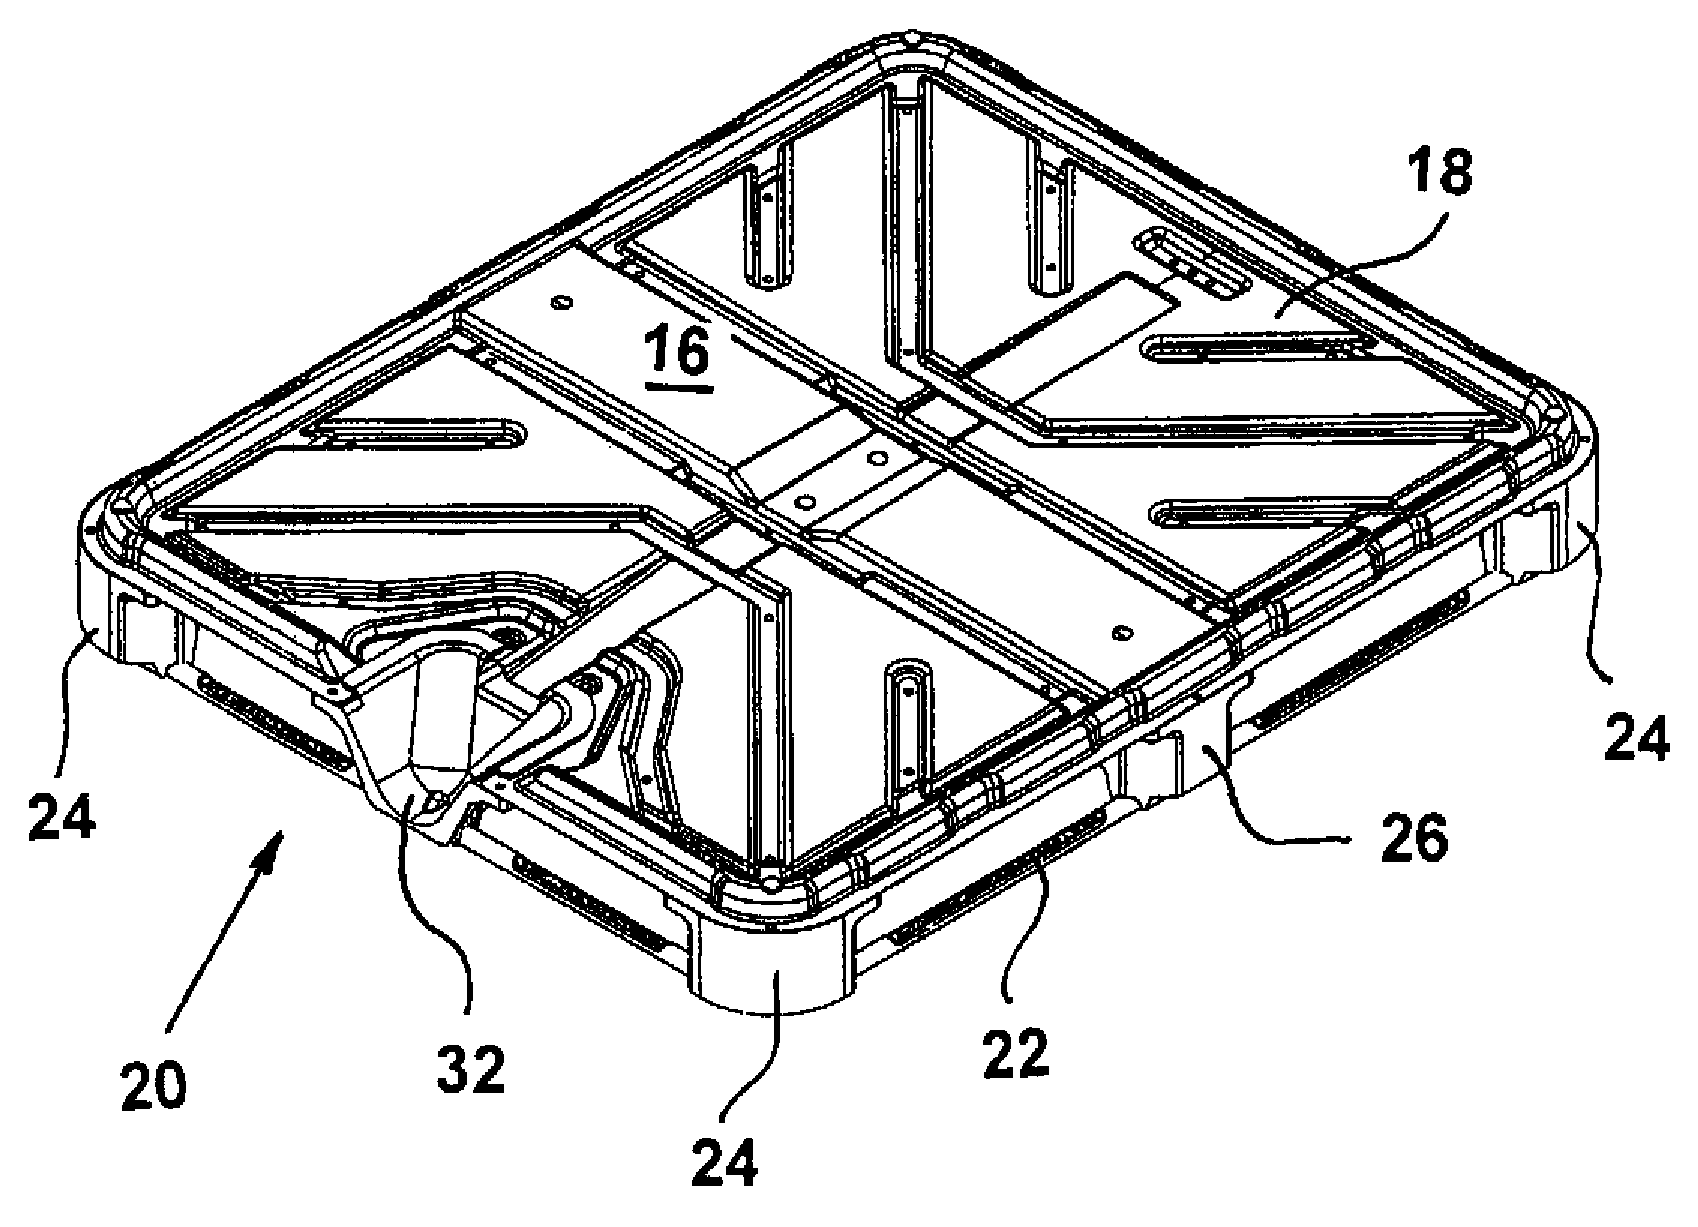 Pallet having spacers made of electrically conductive plastic material and spacers made of non-electrically conductive plastic material